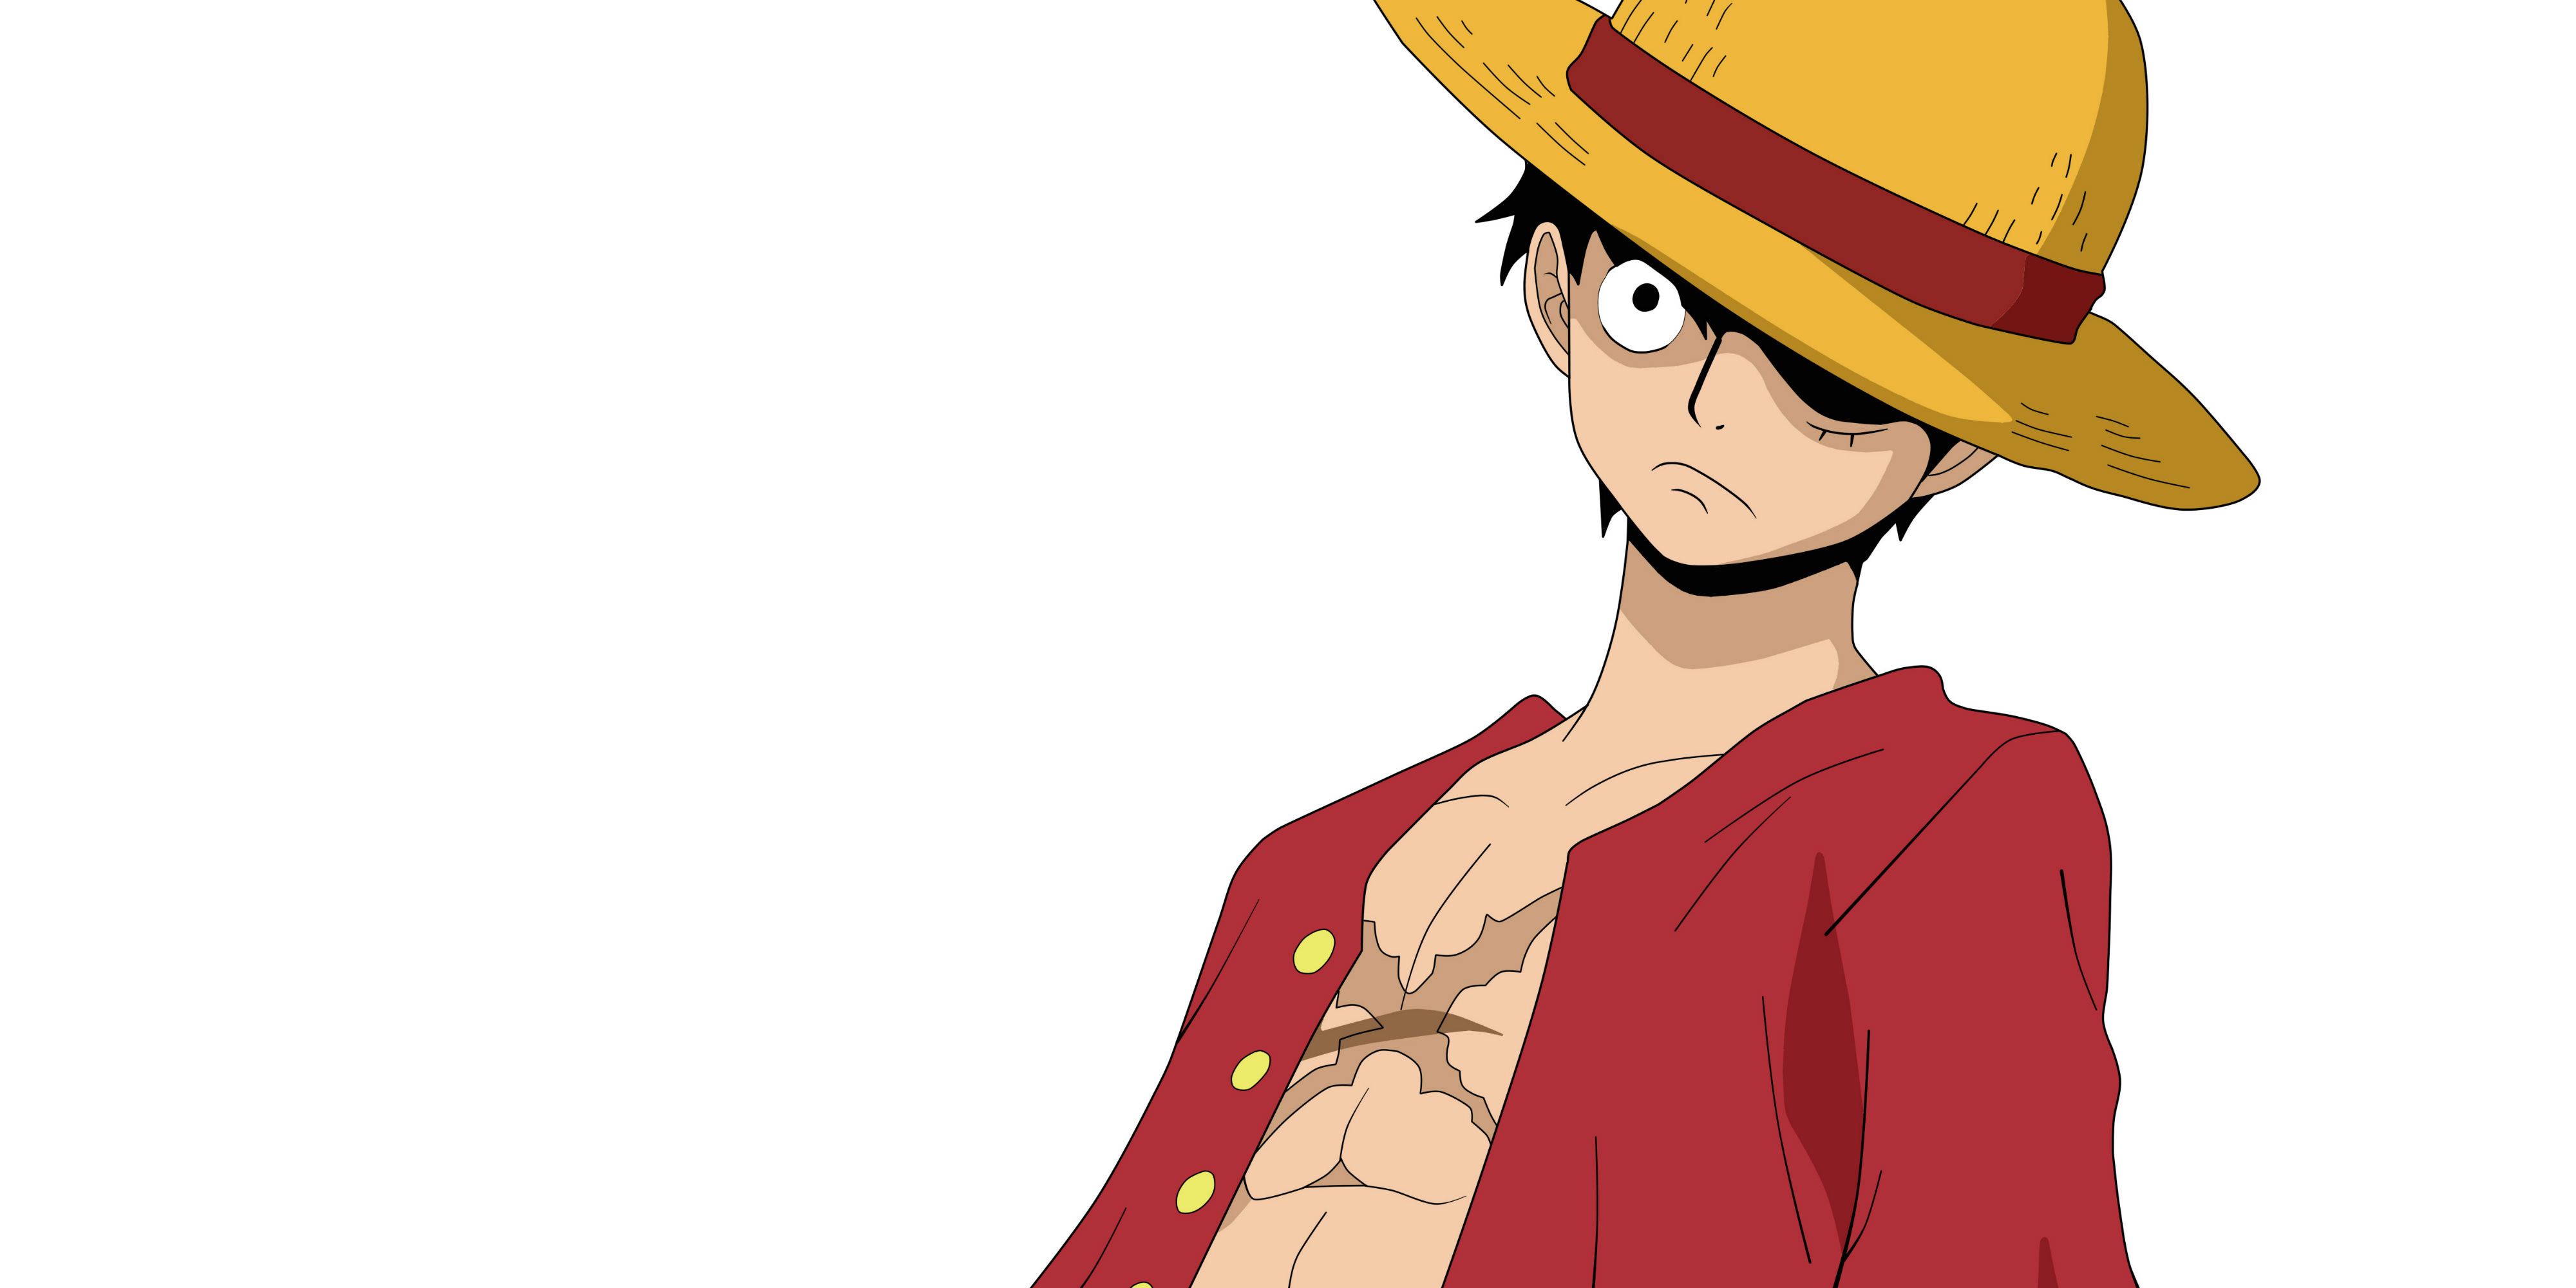 Monkey D Luffy from One Piece